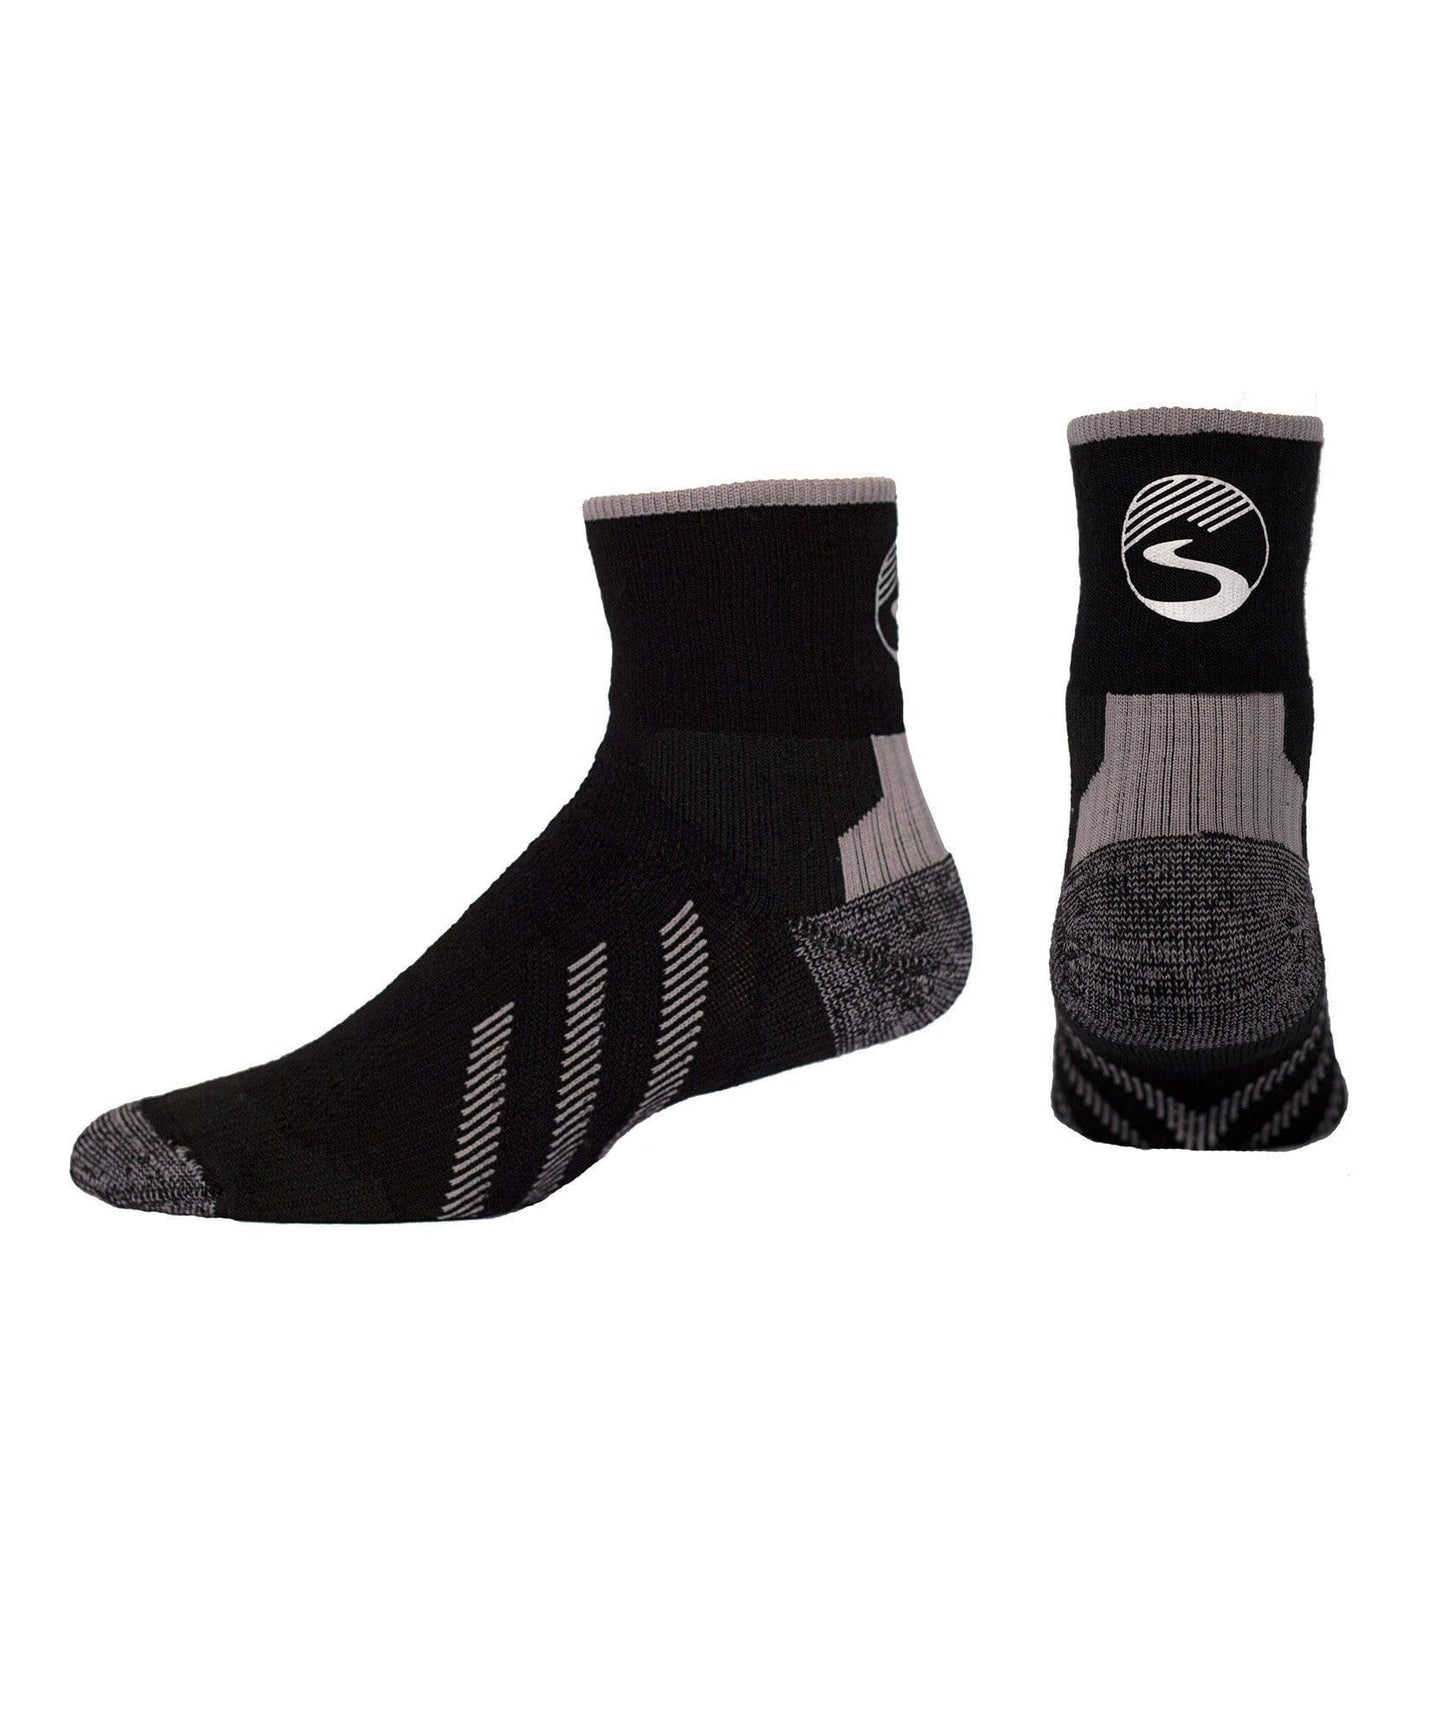 Reflective Torch Socks - Ankle Height